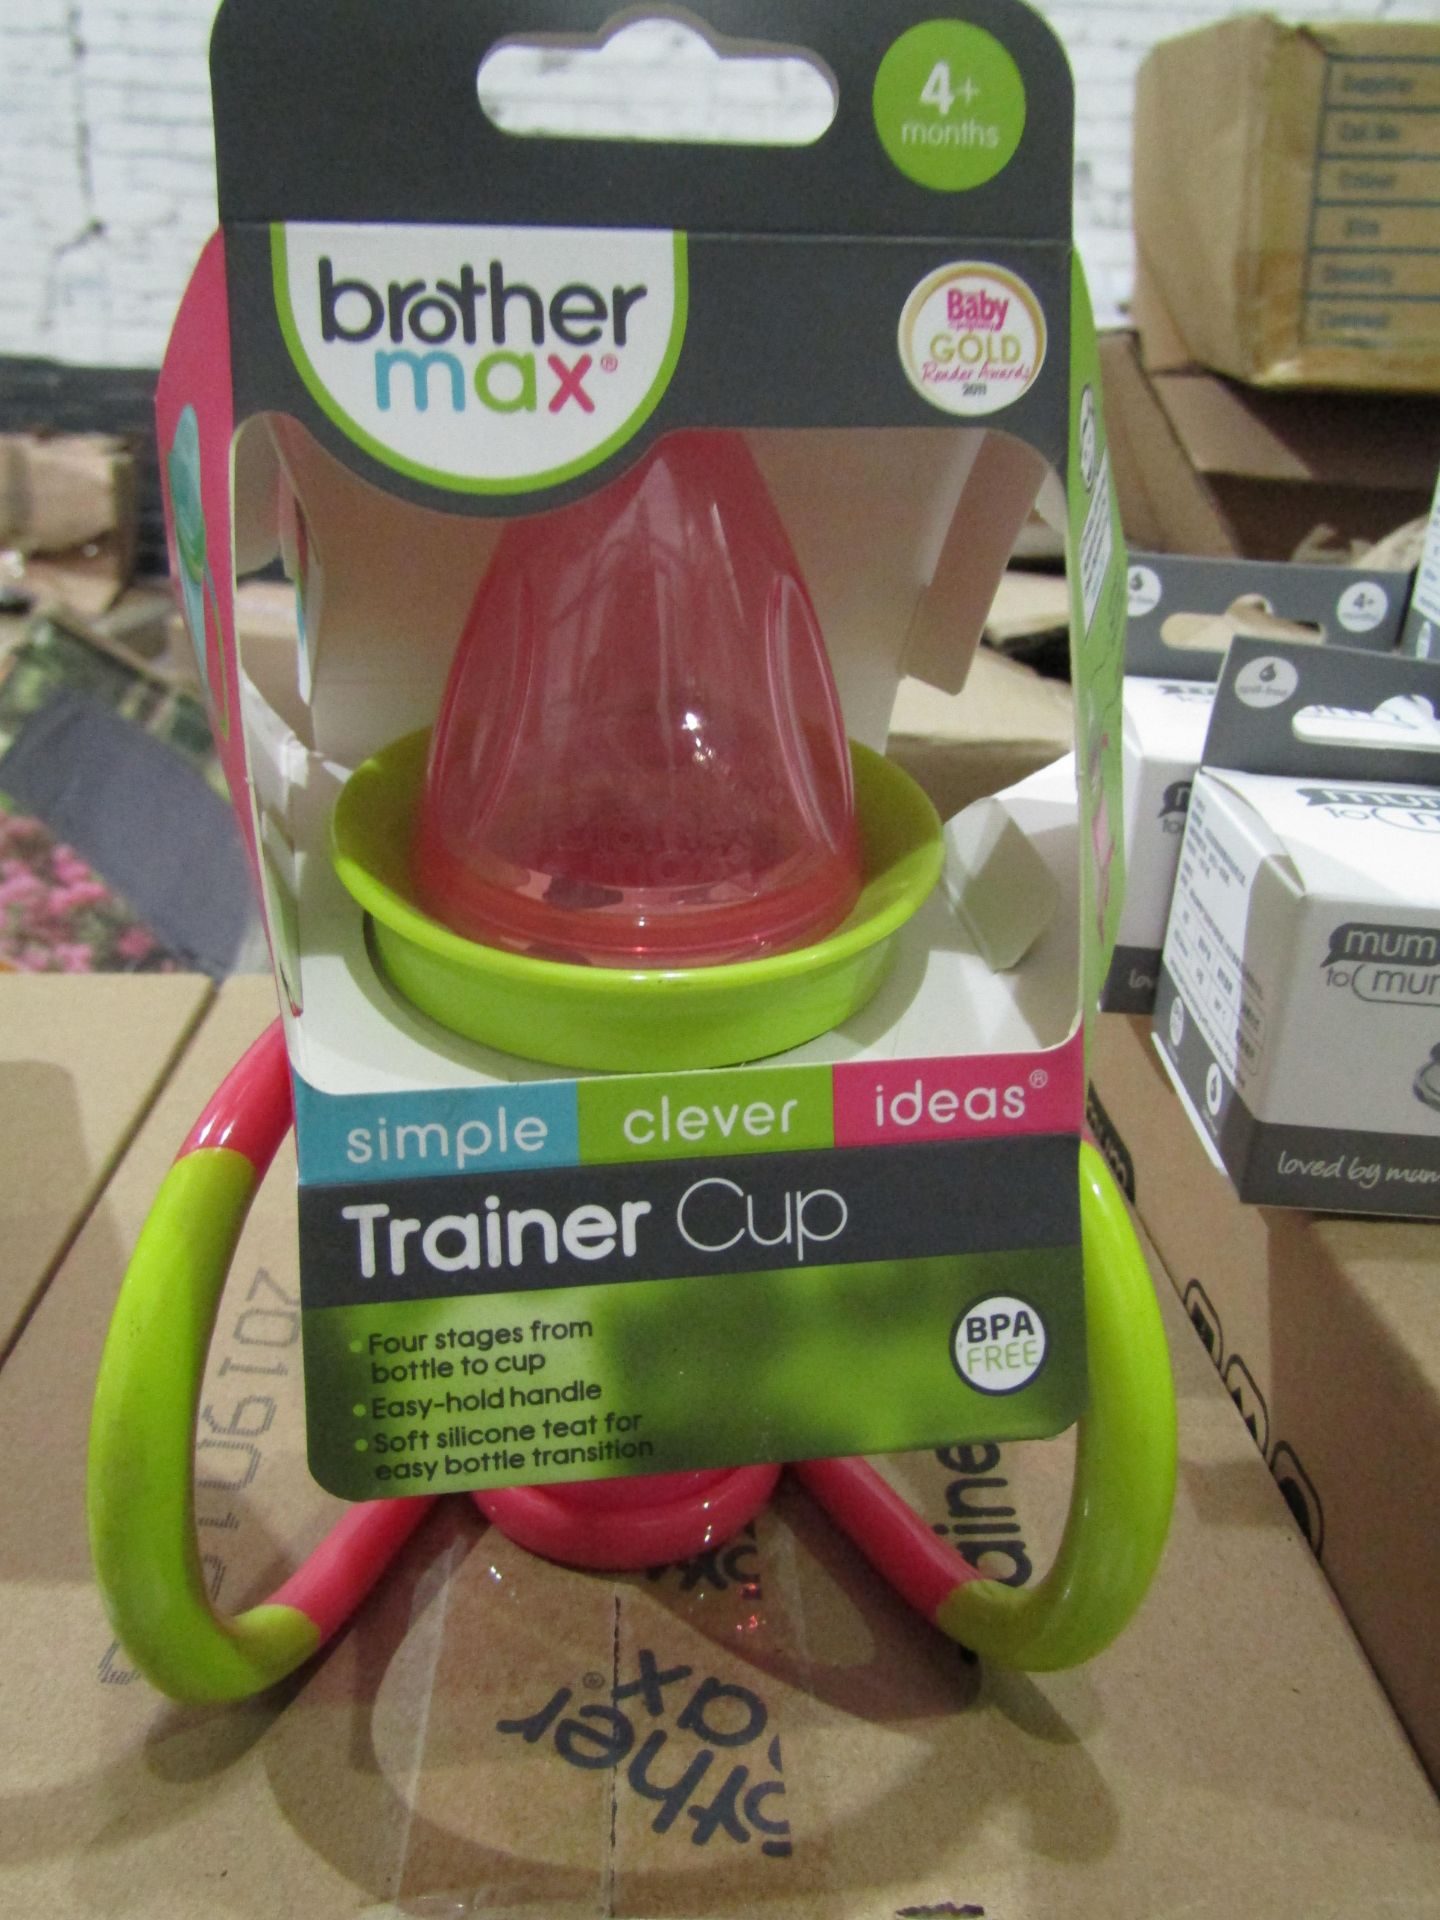 3x Brother Max 170ml Trainer Cup With 4 Ways To Use, Pink - New & Packaged.